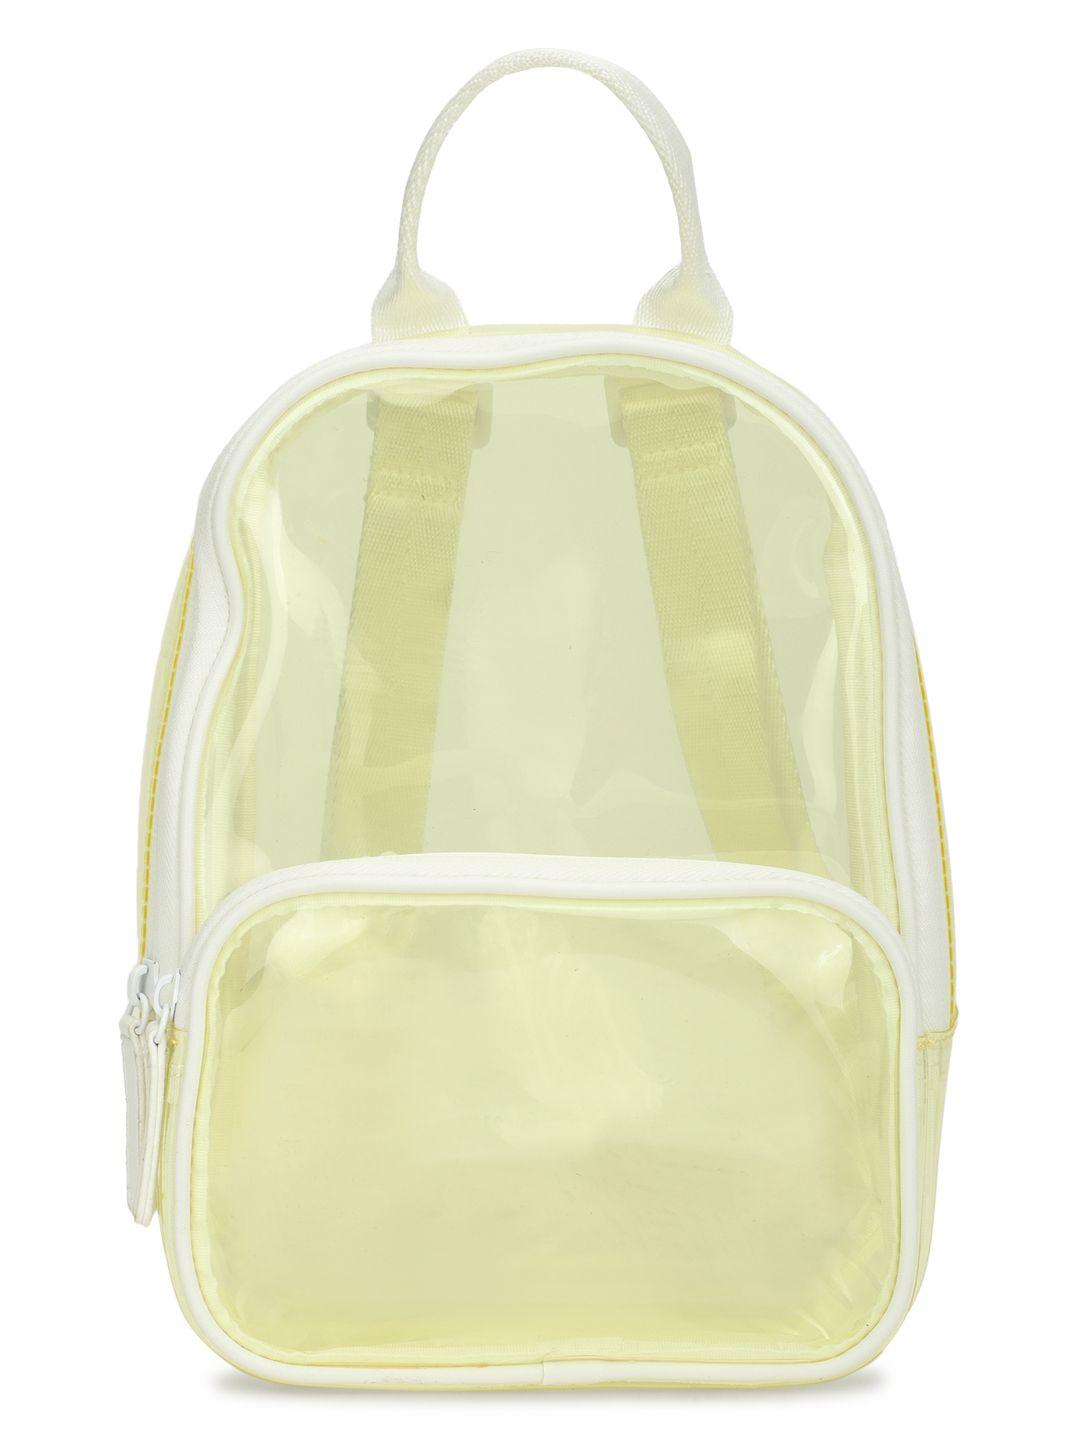 forever-21-women-yellow-&-transparent-backpack